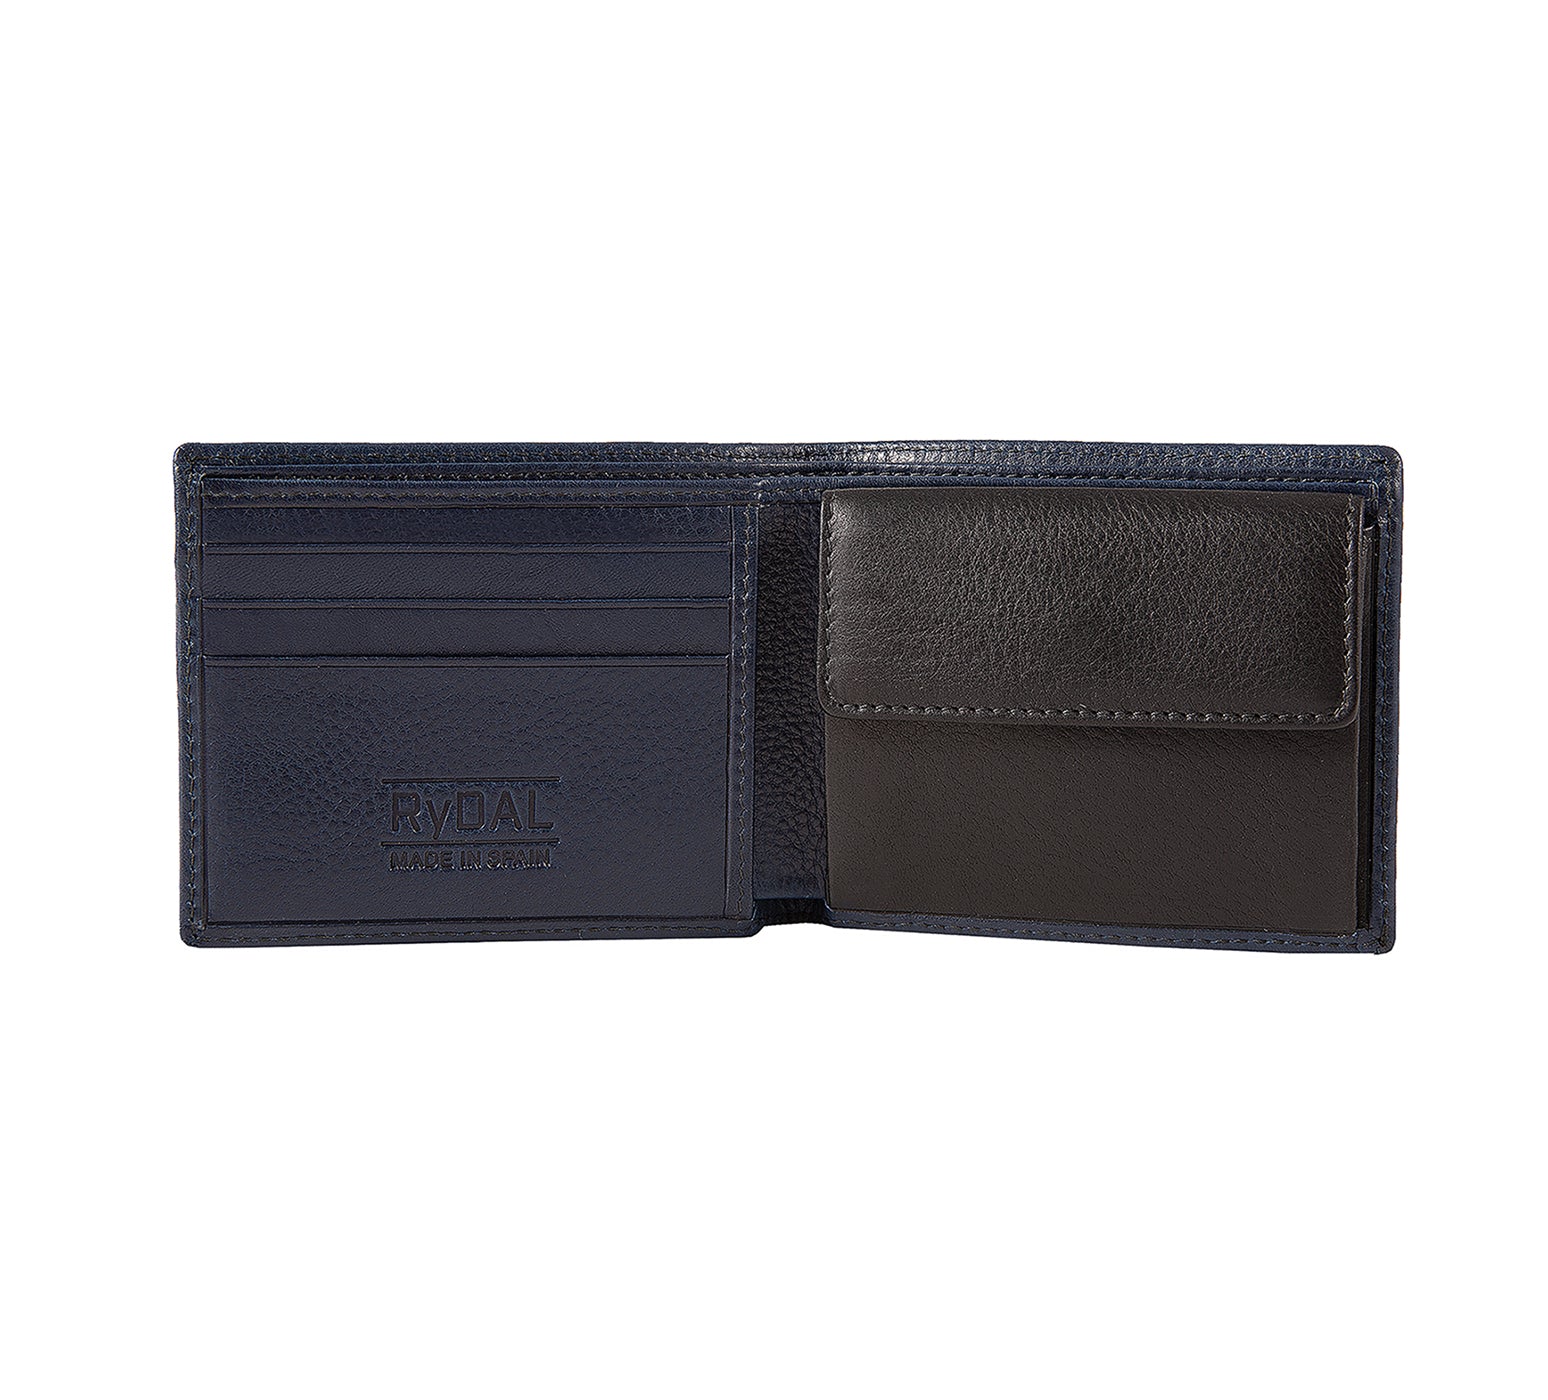 Mens Leather Wallet with Coin Pocket from Rydal in 'Royal Blue/Black' showing interior.